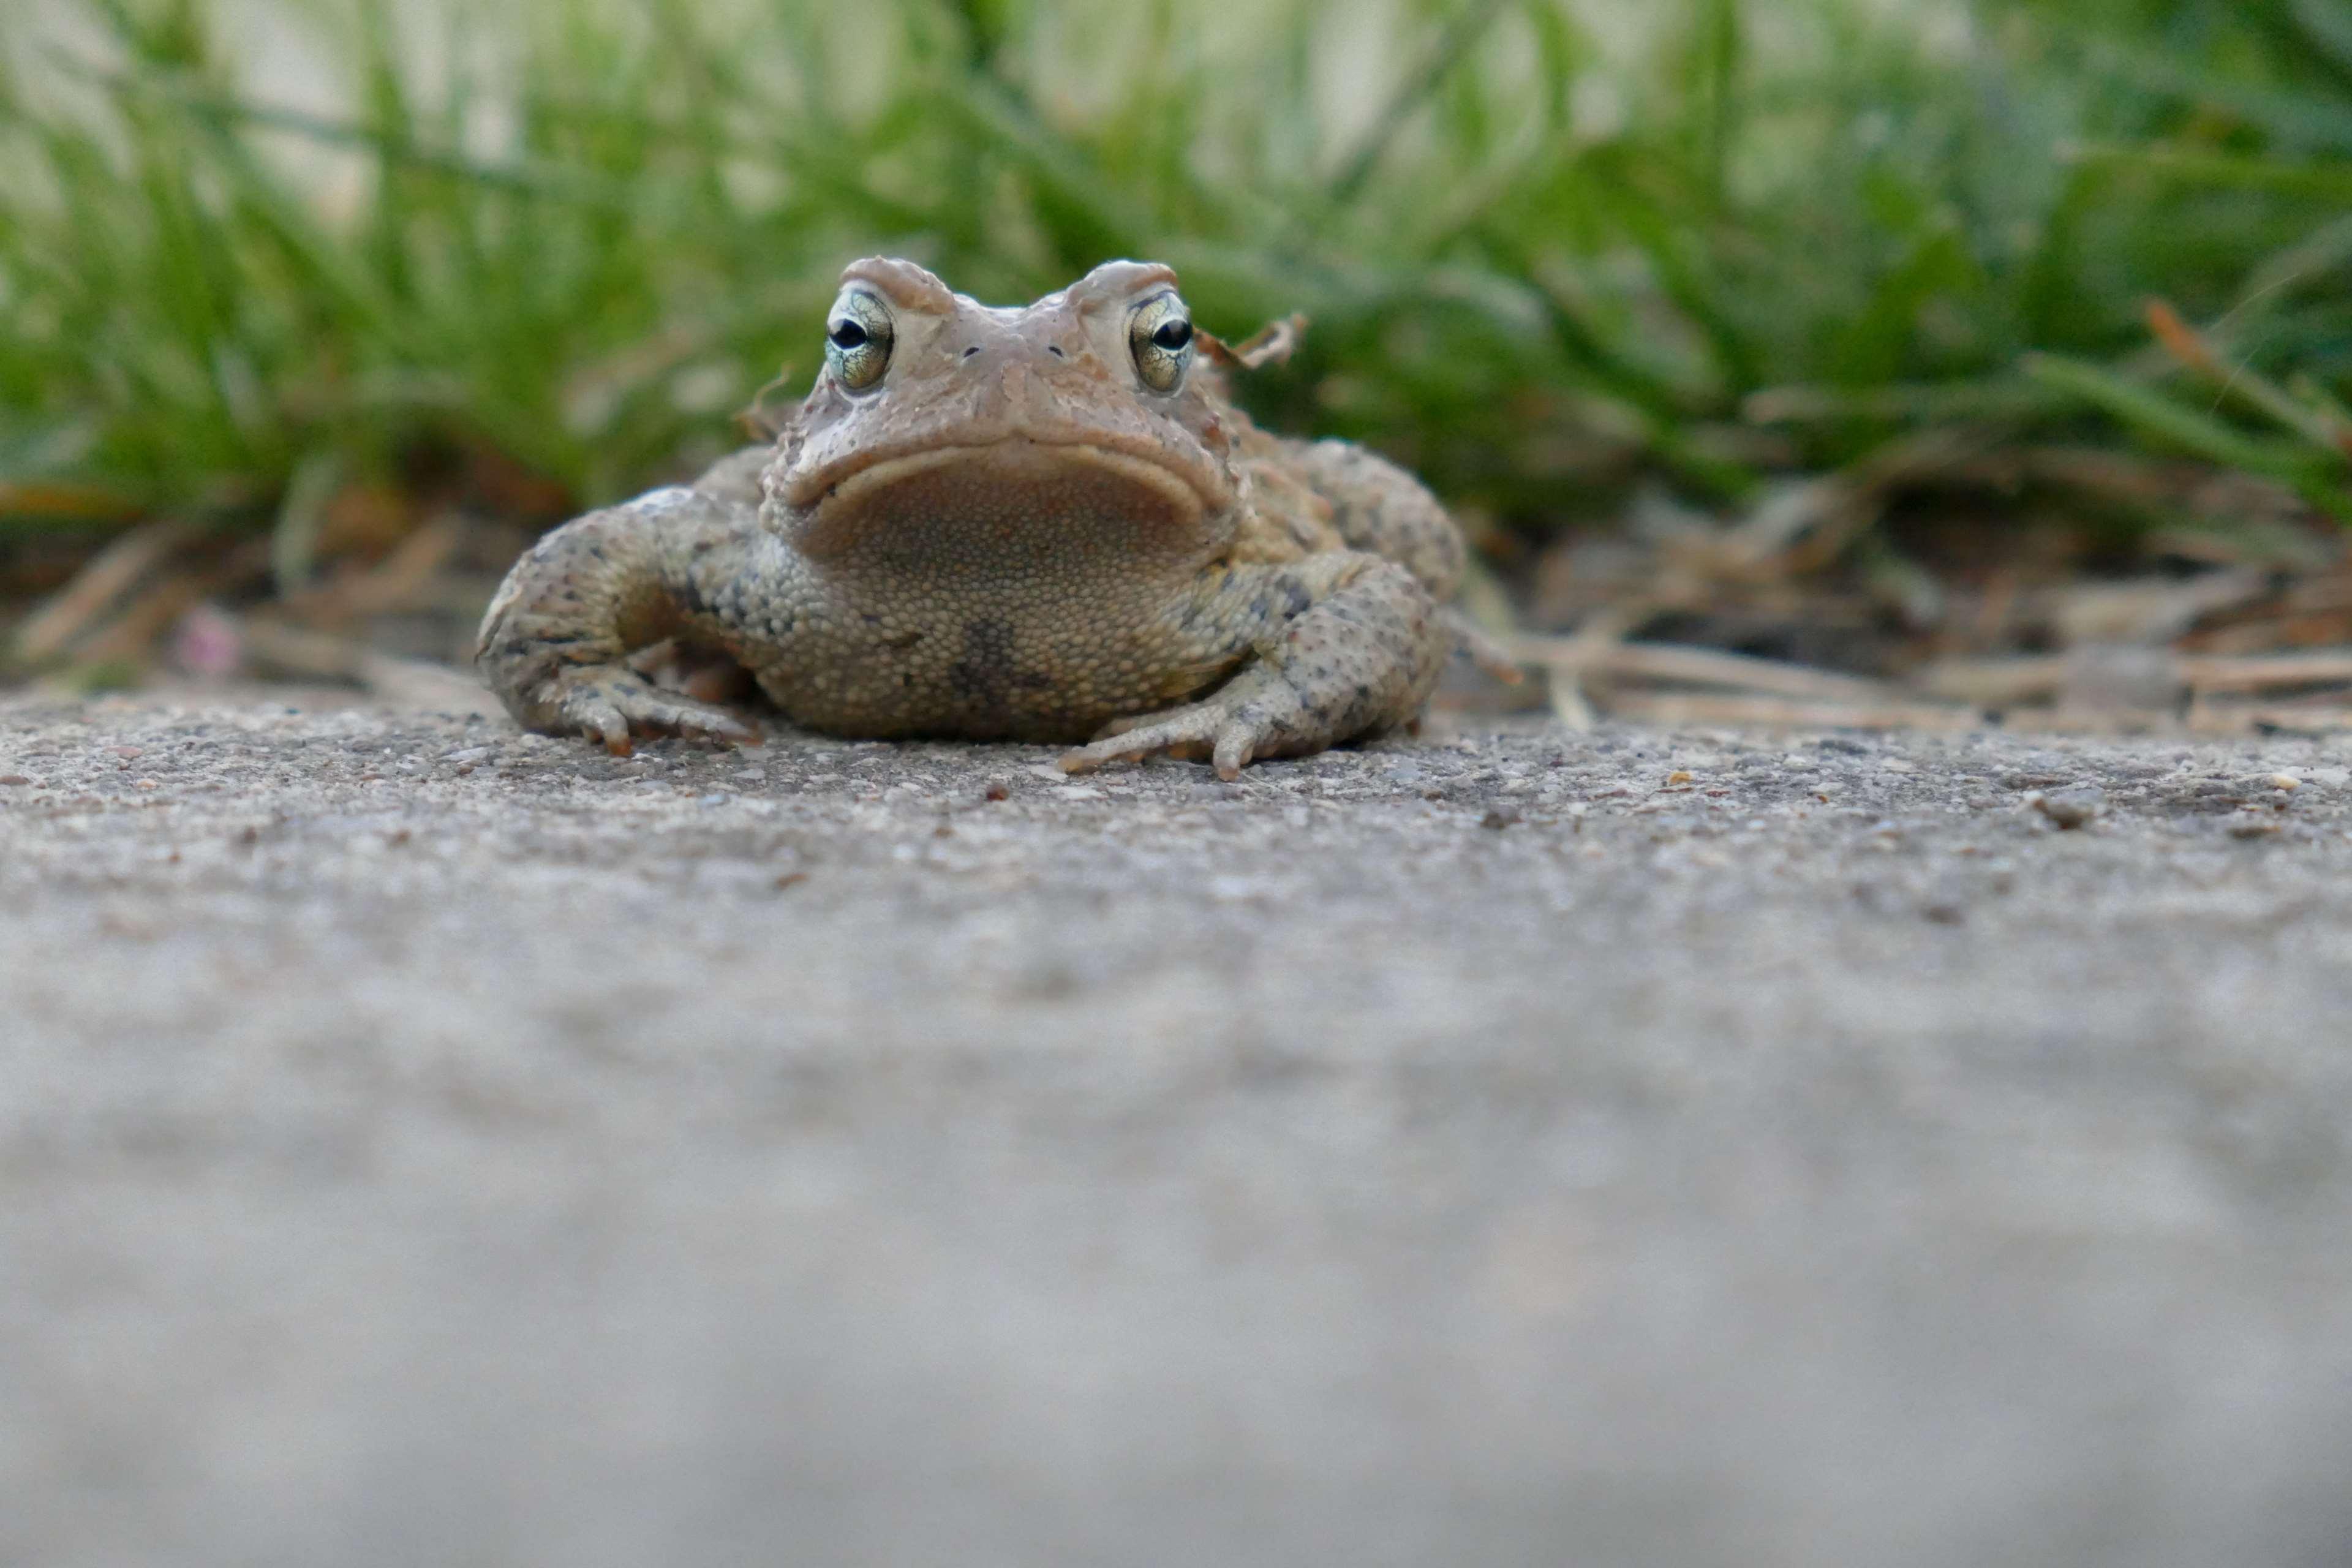 frog, toad 4k wallpaper and background. Free stock image